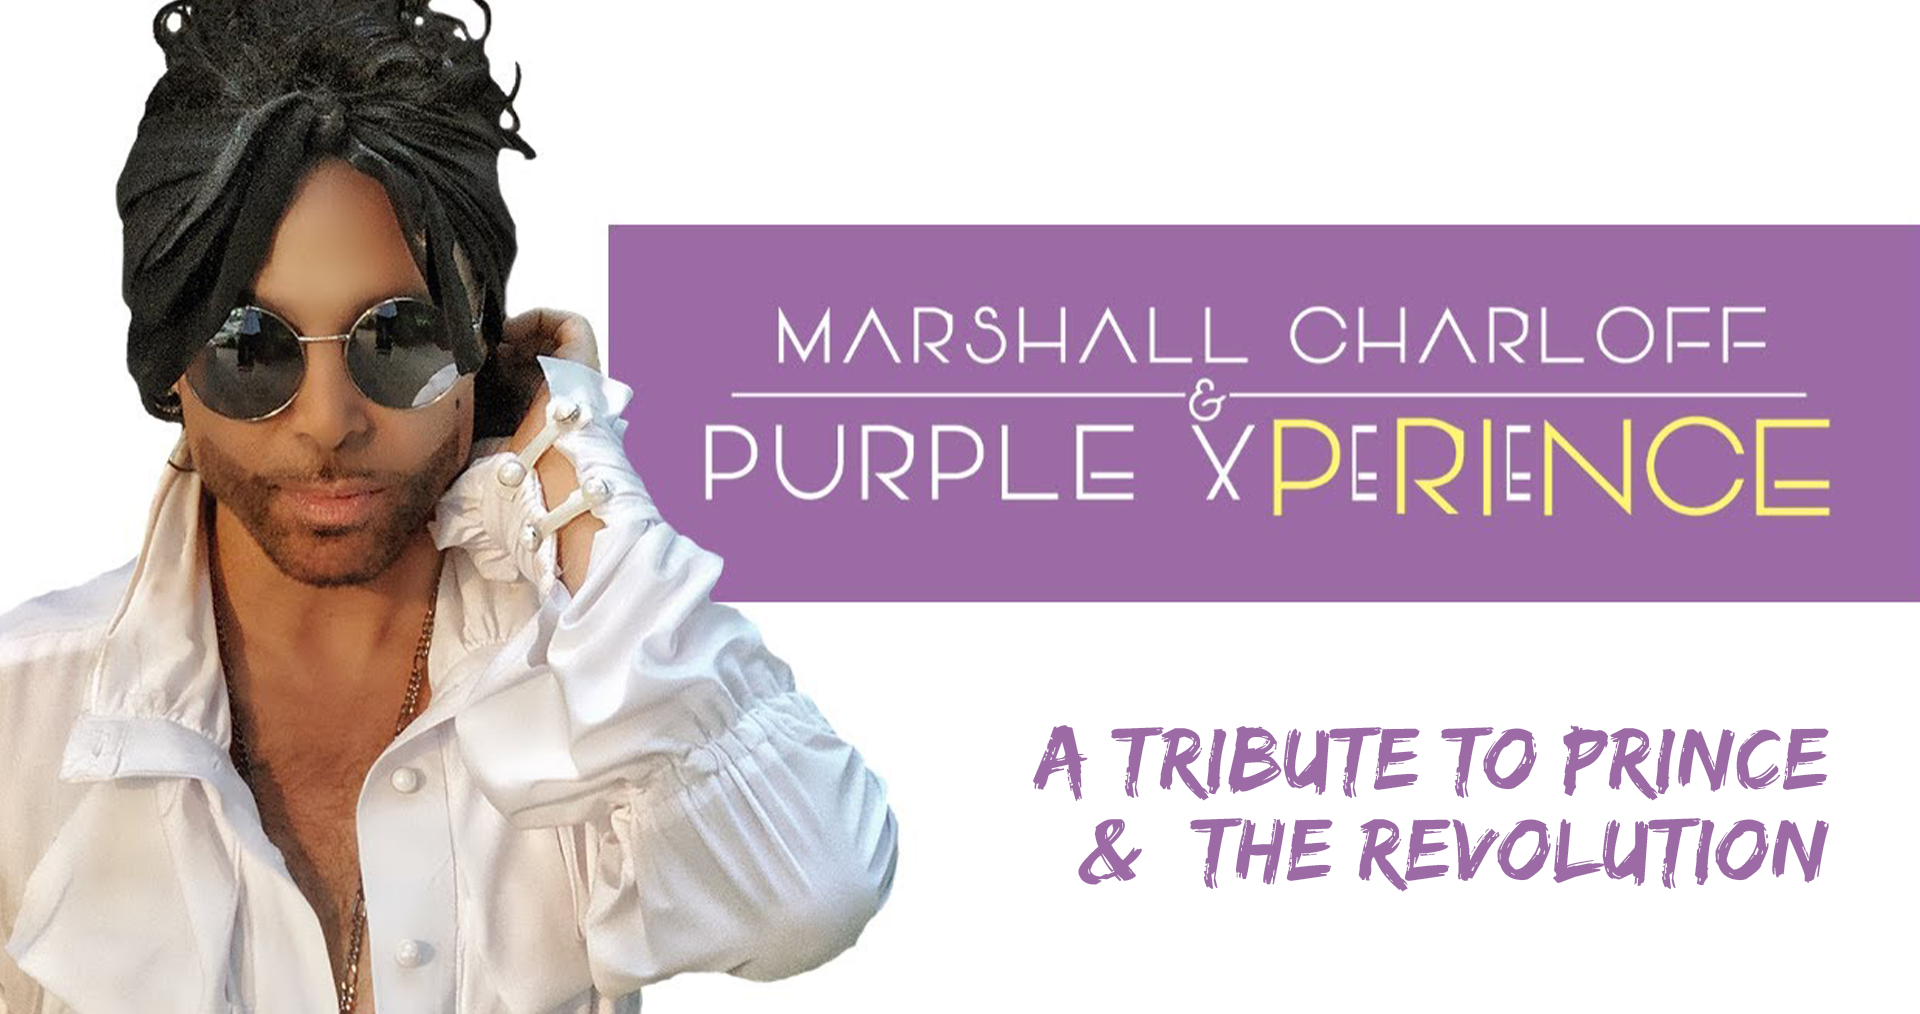 <h1 class="tribe-events-single-event-title">Marshall Charloff & Purple Xperience</h1>